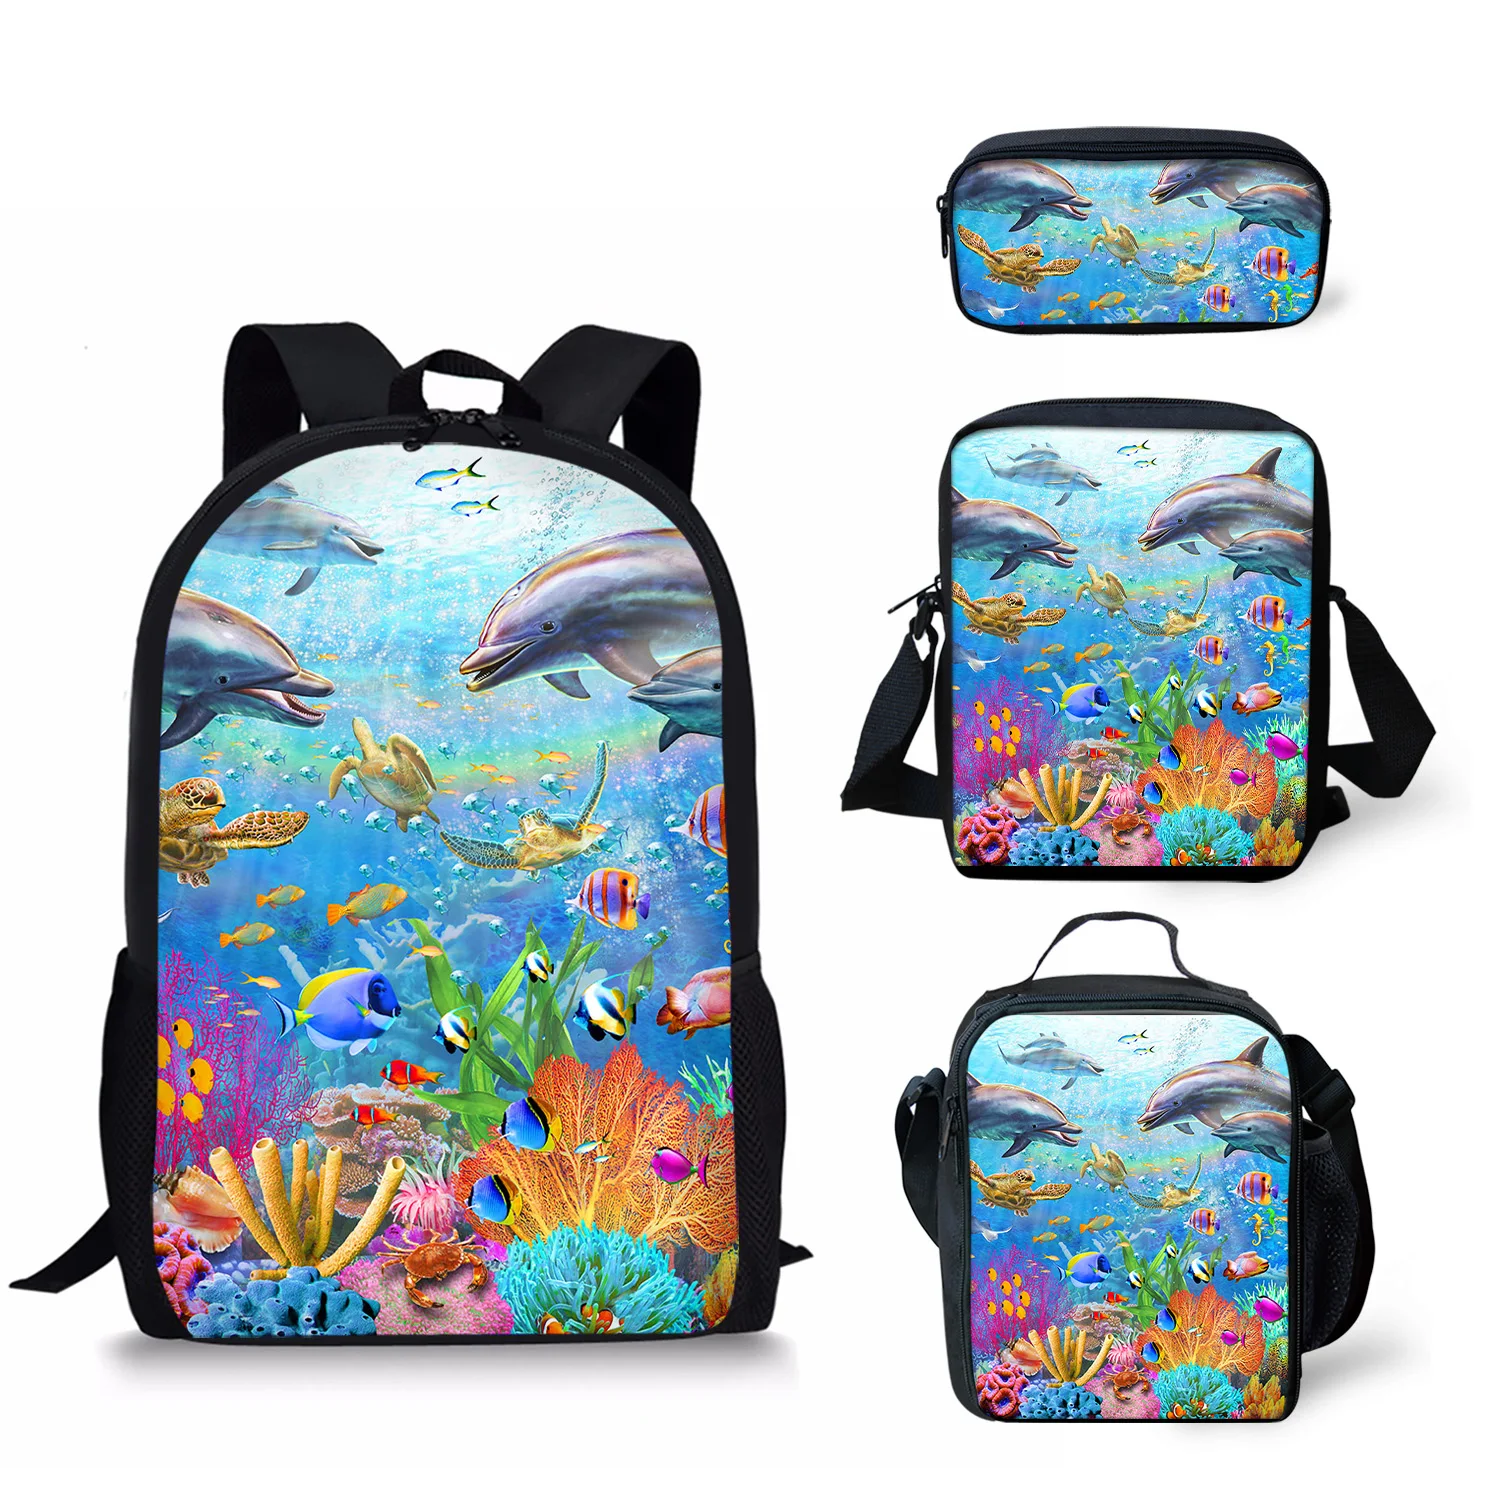 Dolphin Underwater World Pattern 4Pcs/Set School Bags for Girls Boys Students Book Backpack Soft Mochila Infantil Free Shipping